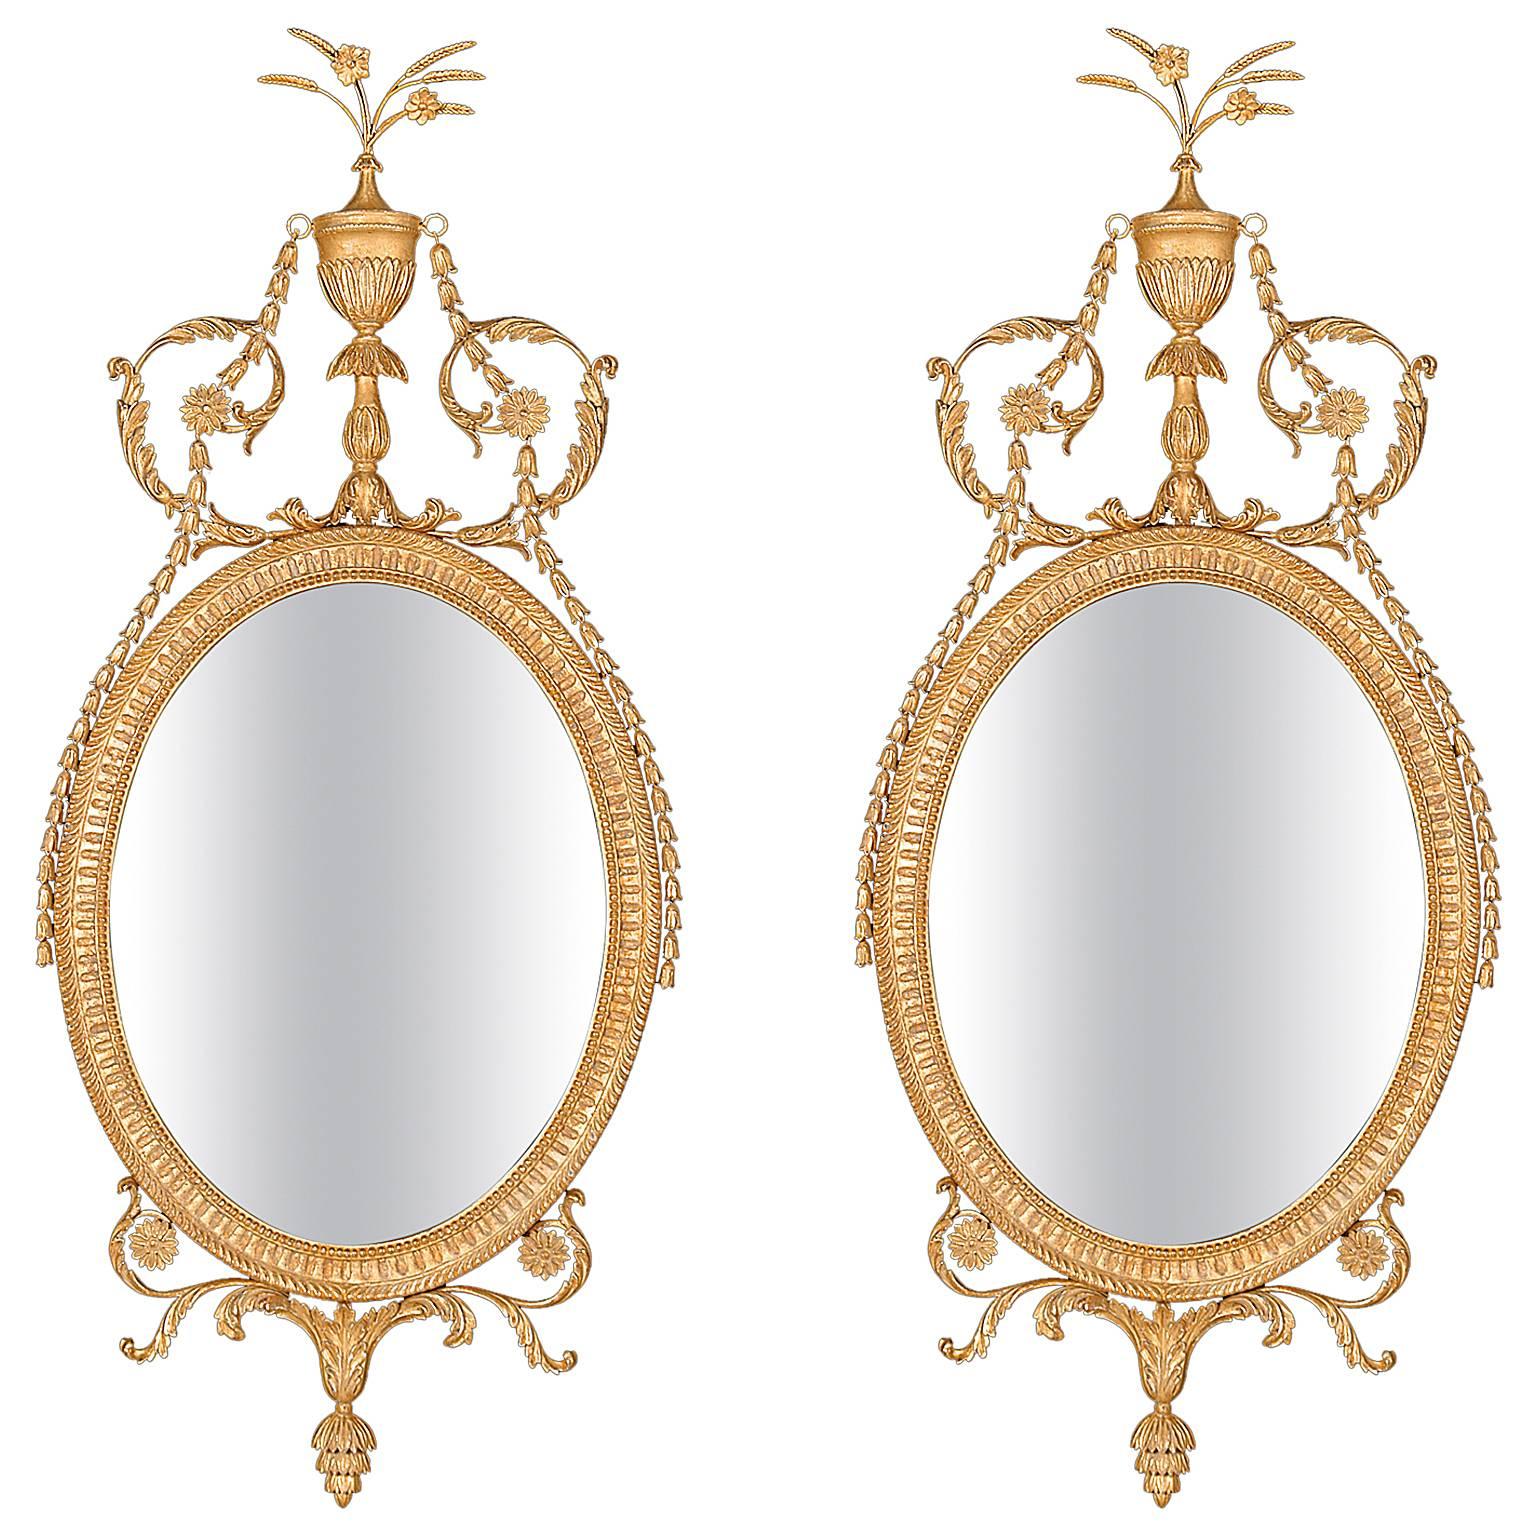 Pair of Oval Mirrors in the manner of Robert Adam For Sale